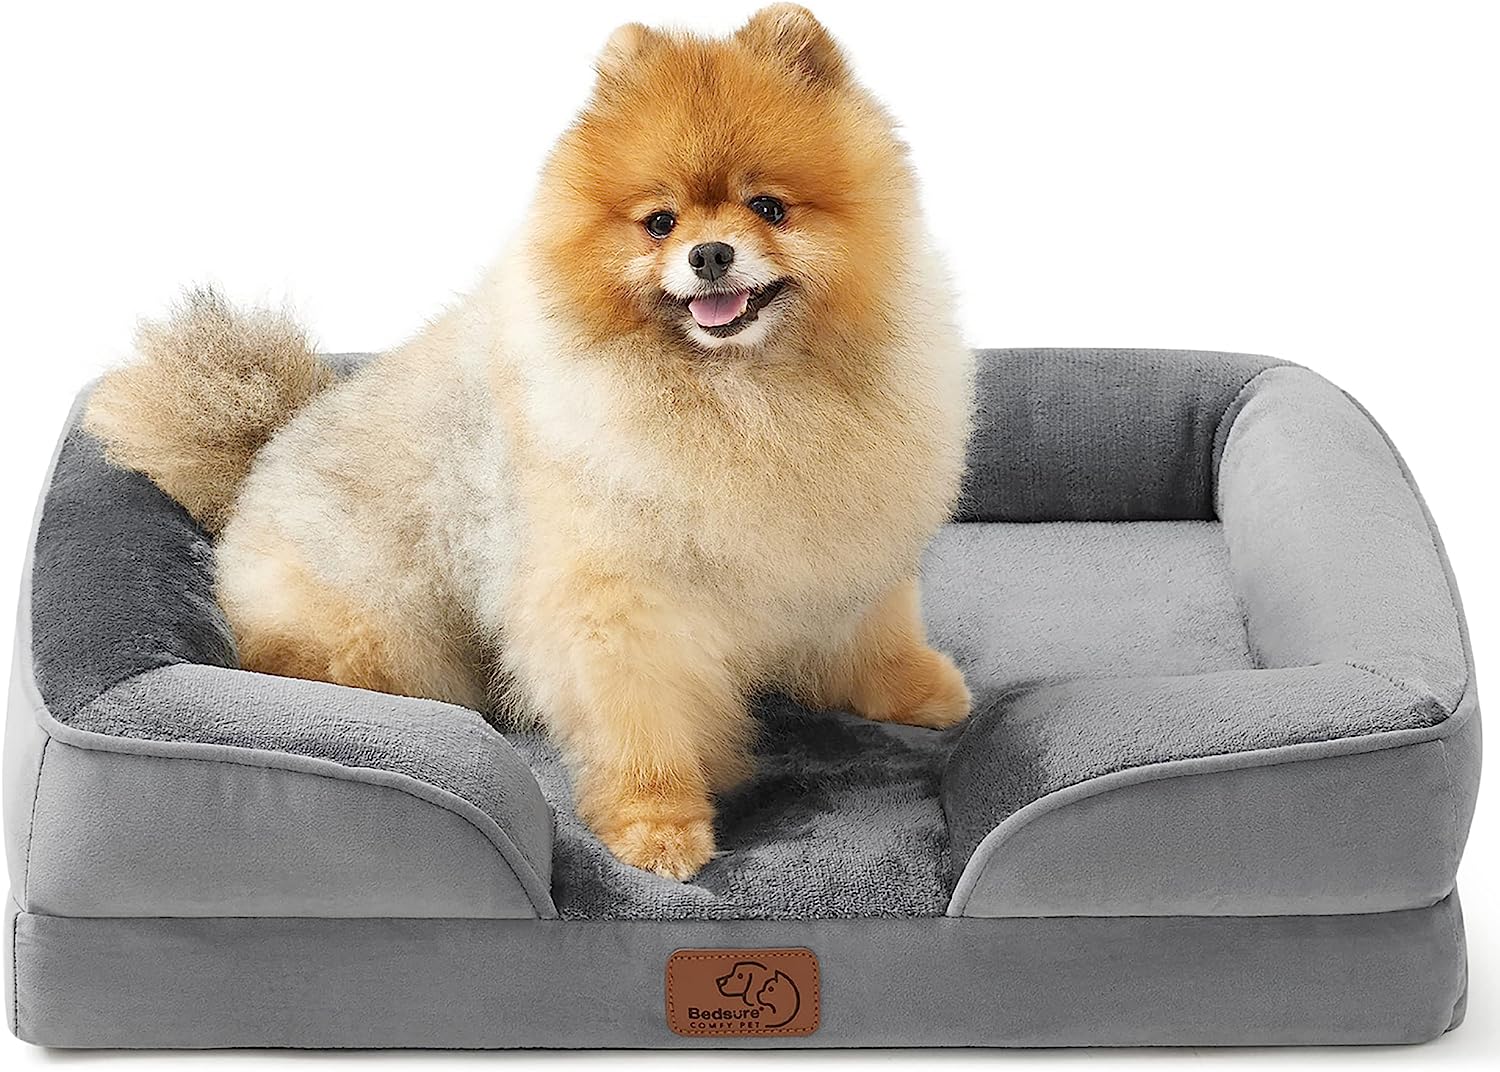 Bedsure Orthopedic, Bolster Dog Beds for Small Dogs - [...]